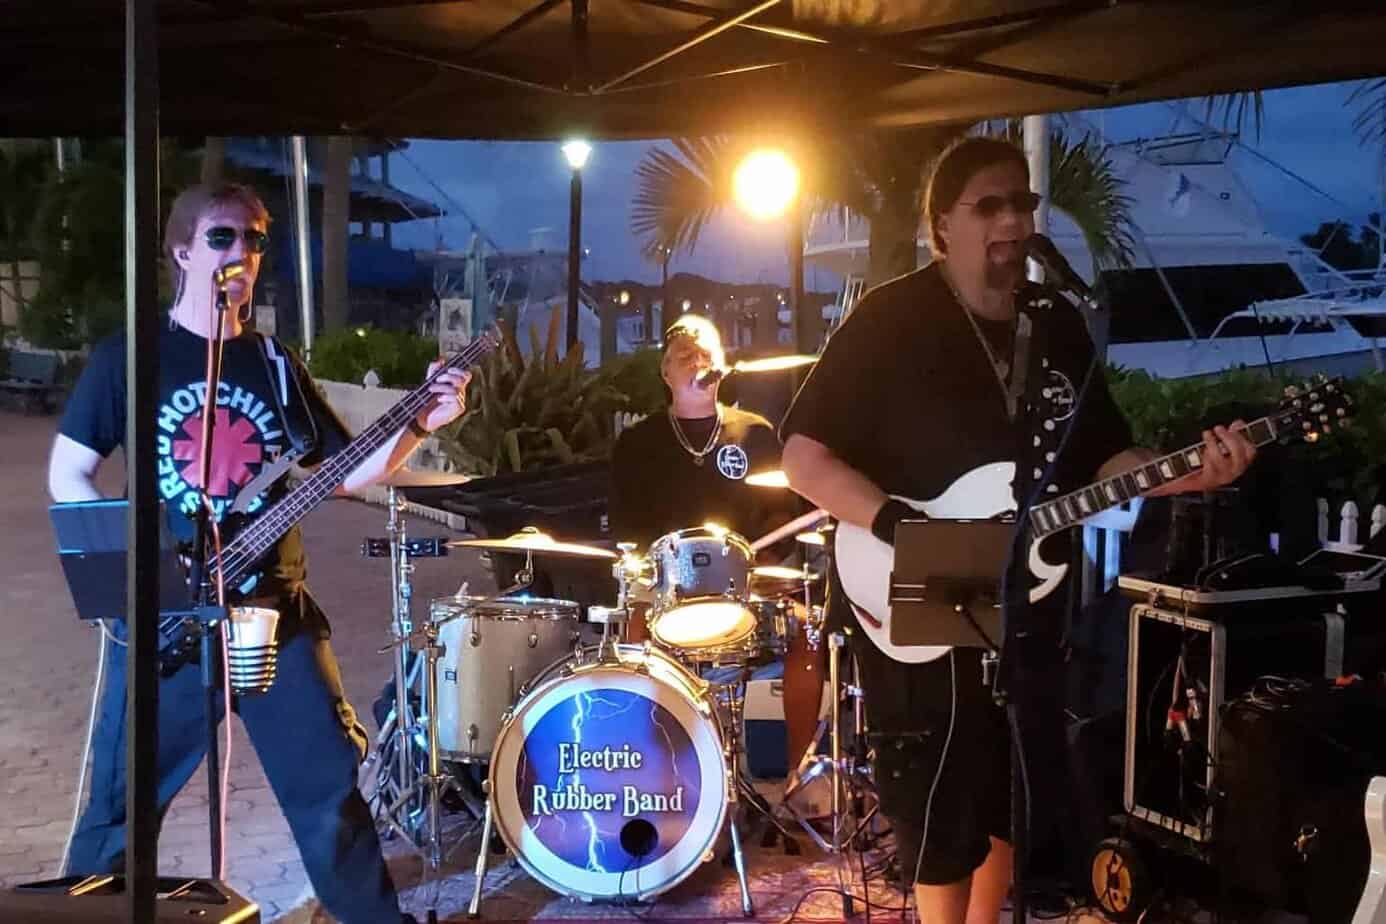 The Electric Rubber Band at Pirate's Cove